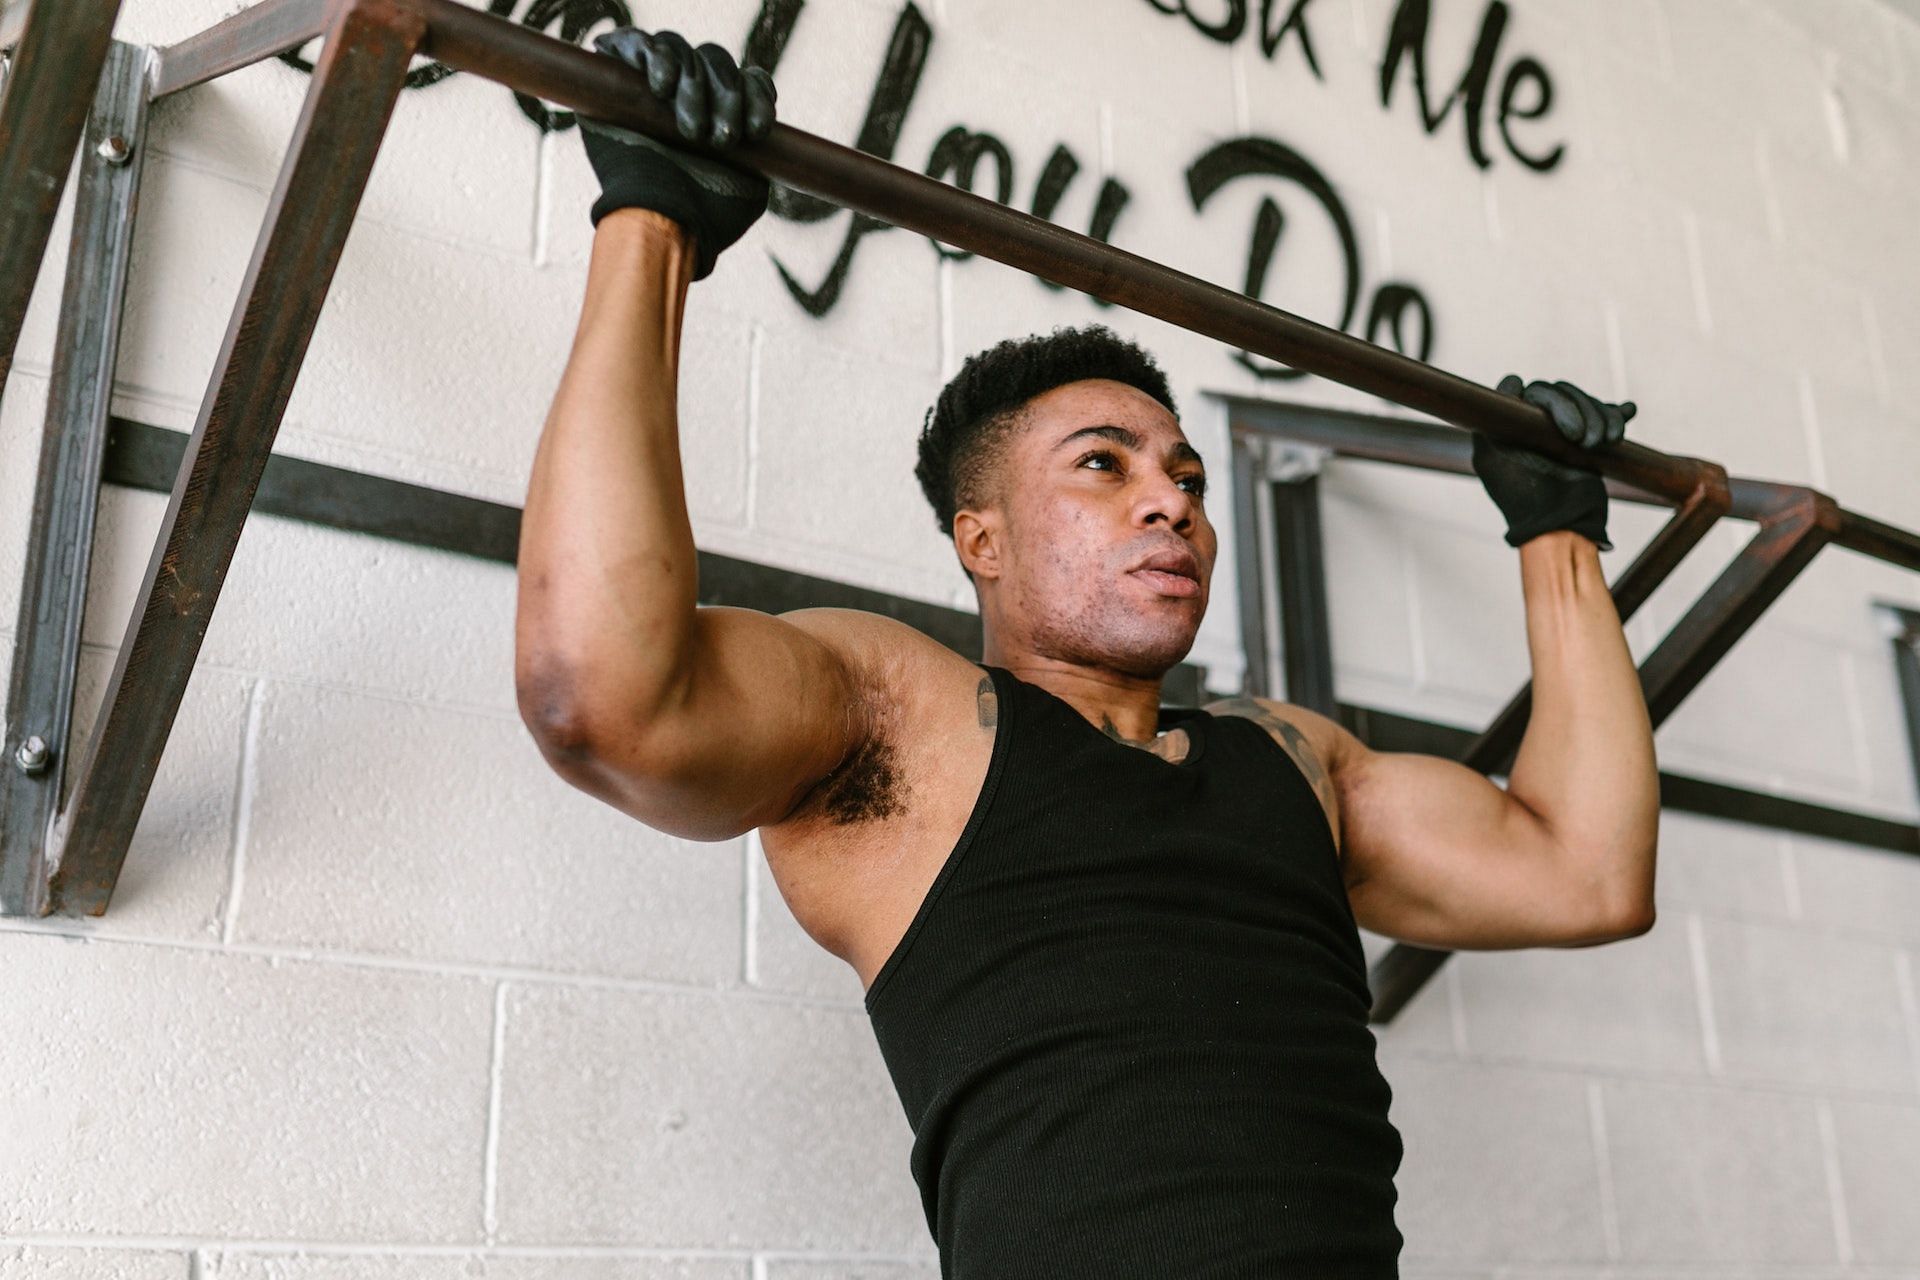 Pull-up bar exercises help strengthen the upper body. (Photo via Pexel/RODNAE Productions)